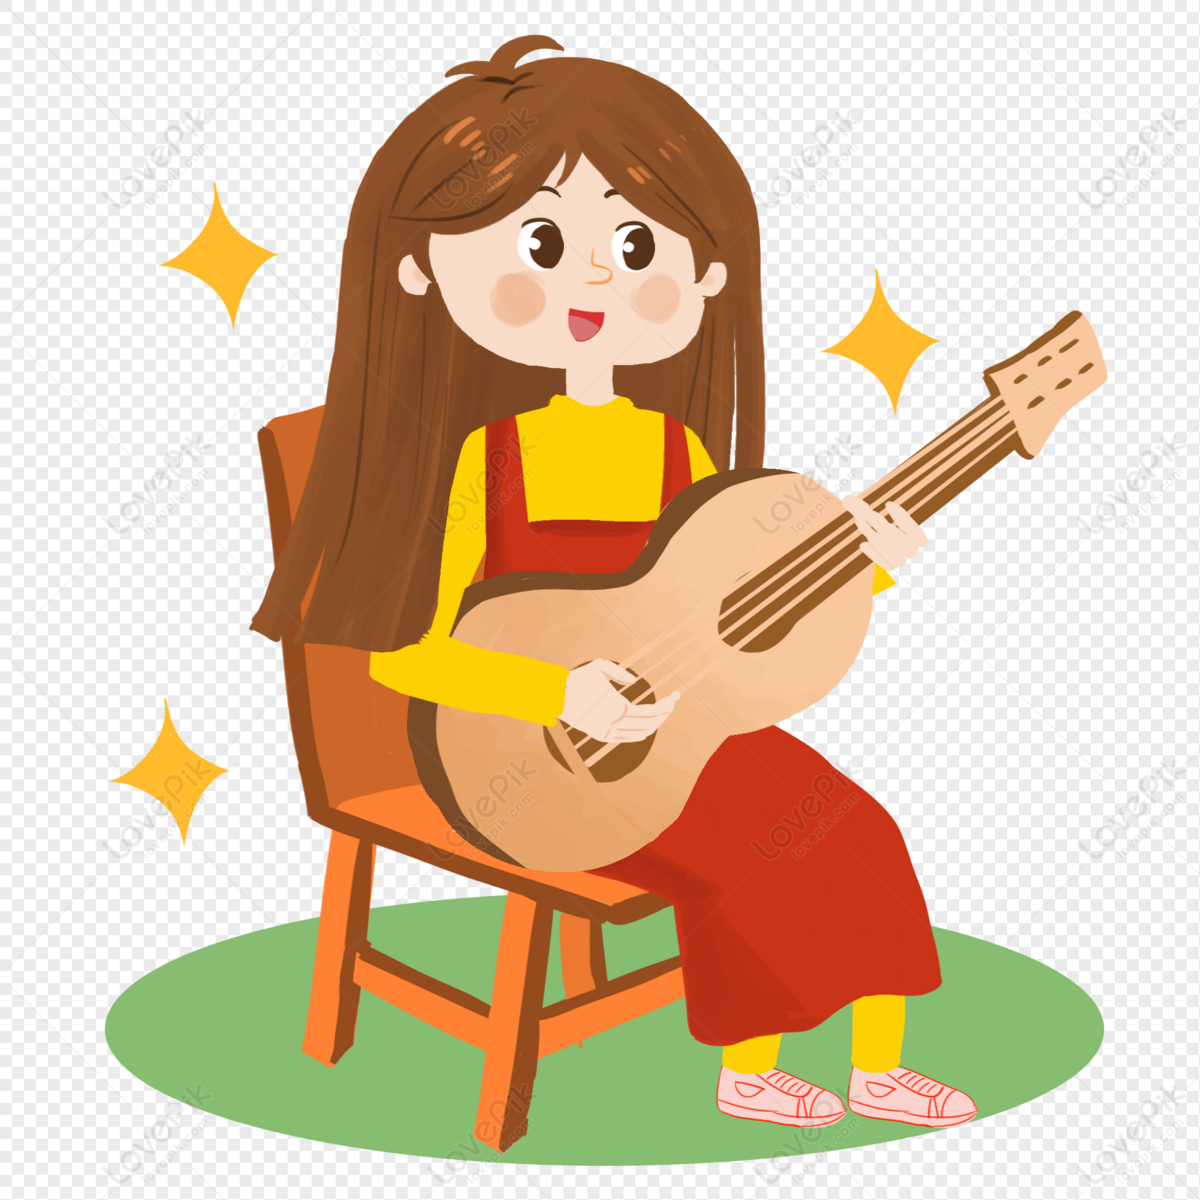 Sitting Girl Playing Guitar PNG Image Free Download And Clipart Image For  Free Download - Lovepik | 401318511